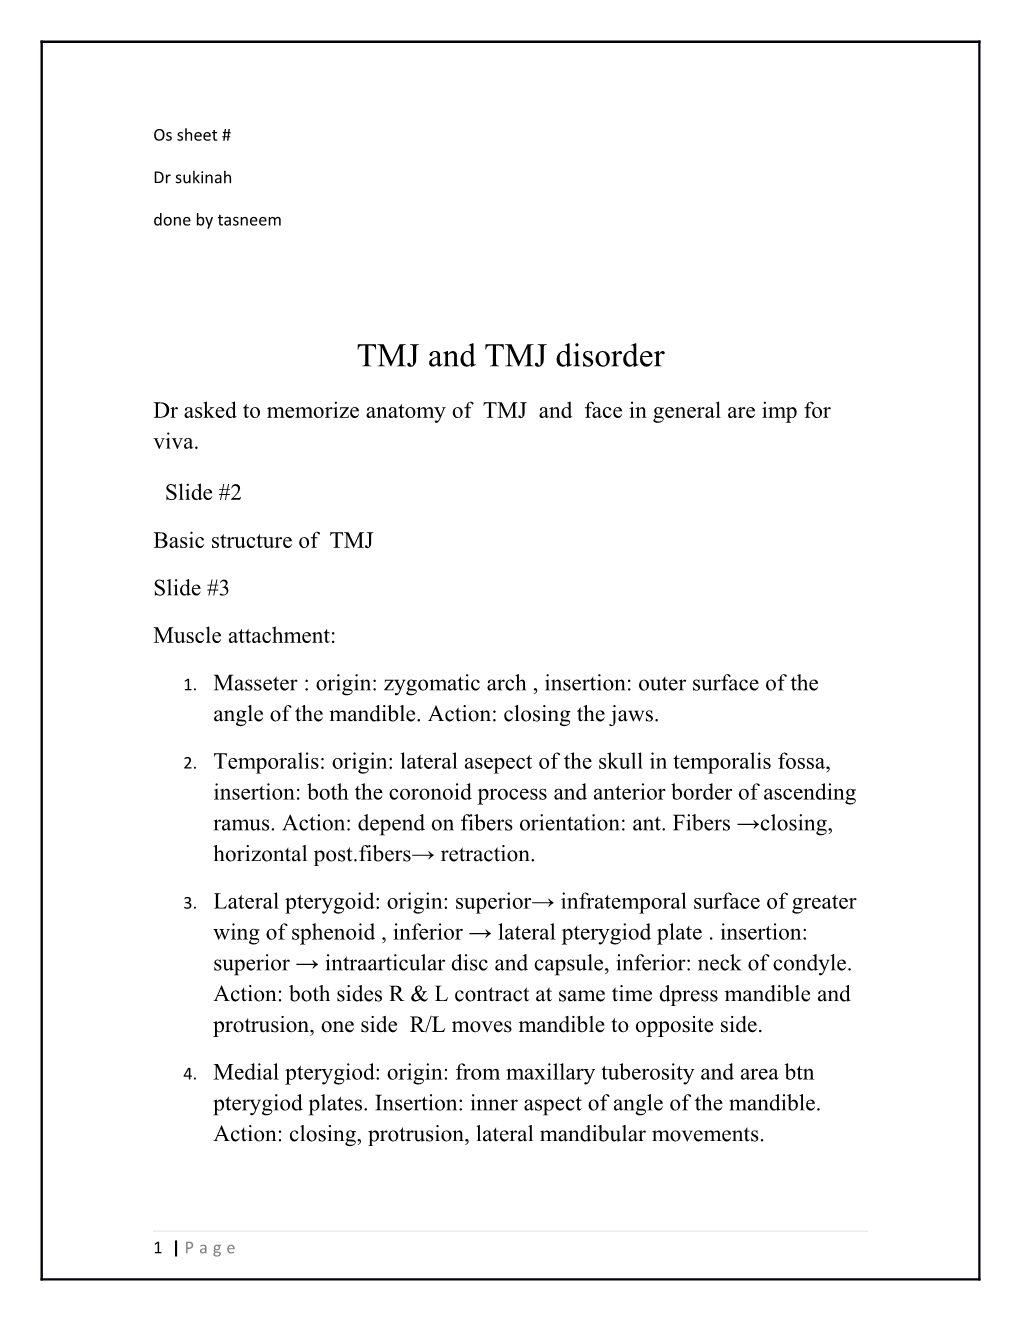 TMJ and TMJ Disorder